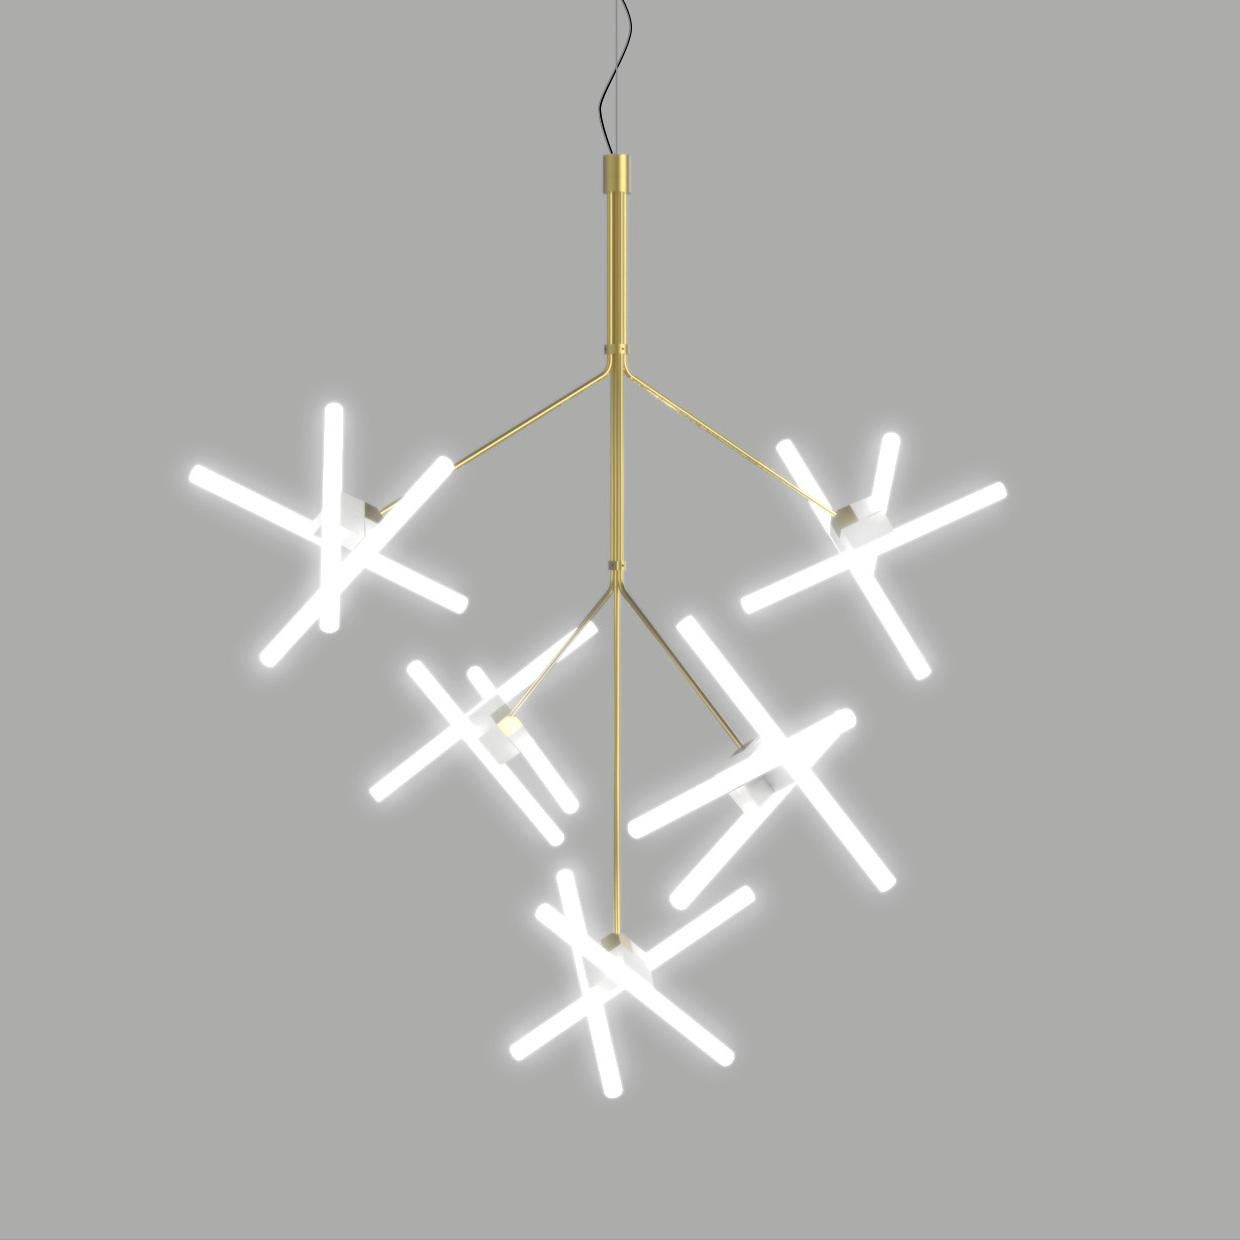 Olvidada chandelier lamp designed by Pepe Cortés.
Manufactured by BD Barcelona 

Steel structure and lamp holder nucleas with a brass scotch polished finish. Linestras 9W LED.
Linestras 9W LED S14D 3x9W LED suitable for 110 v. and v 220.